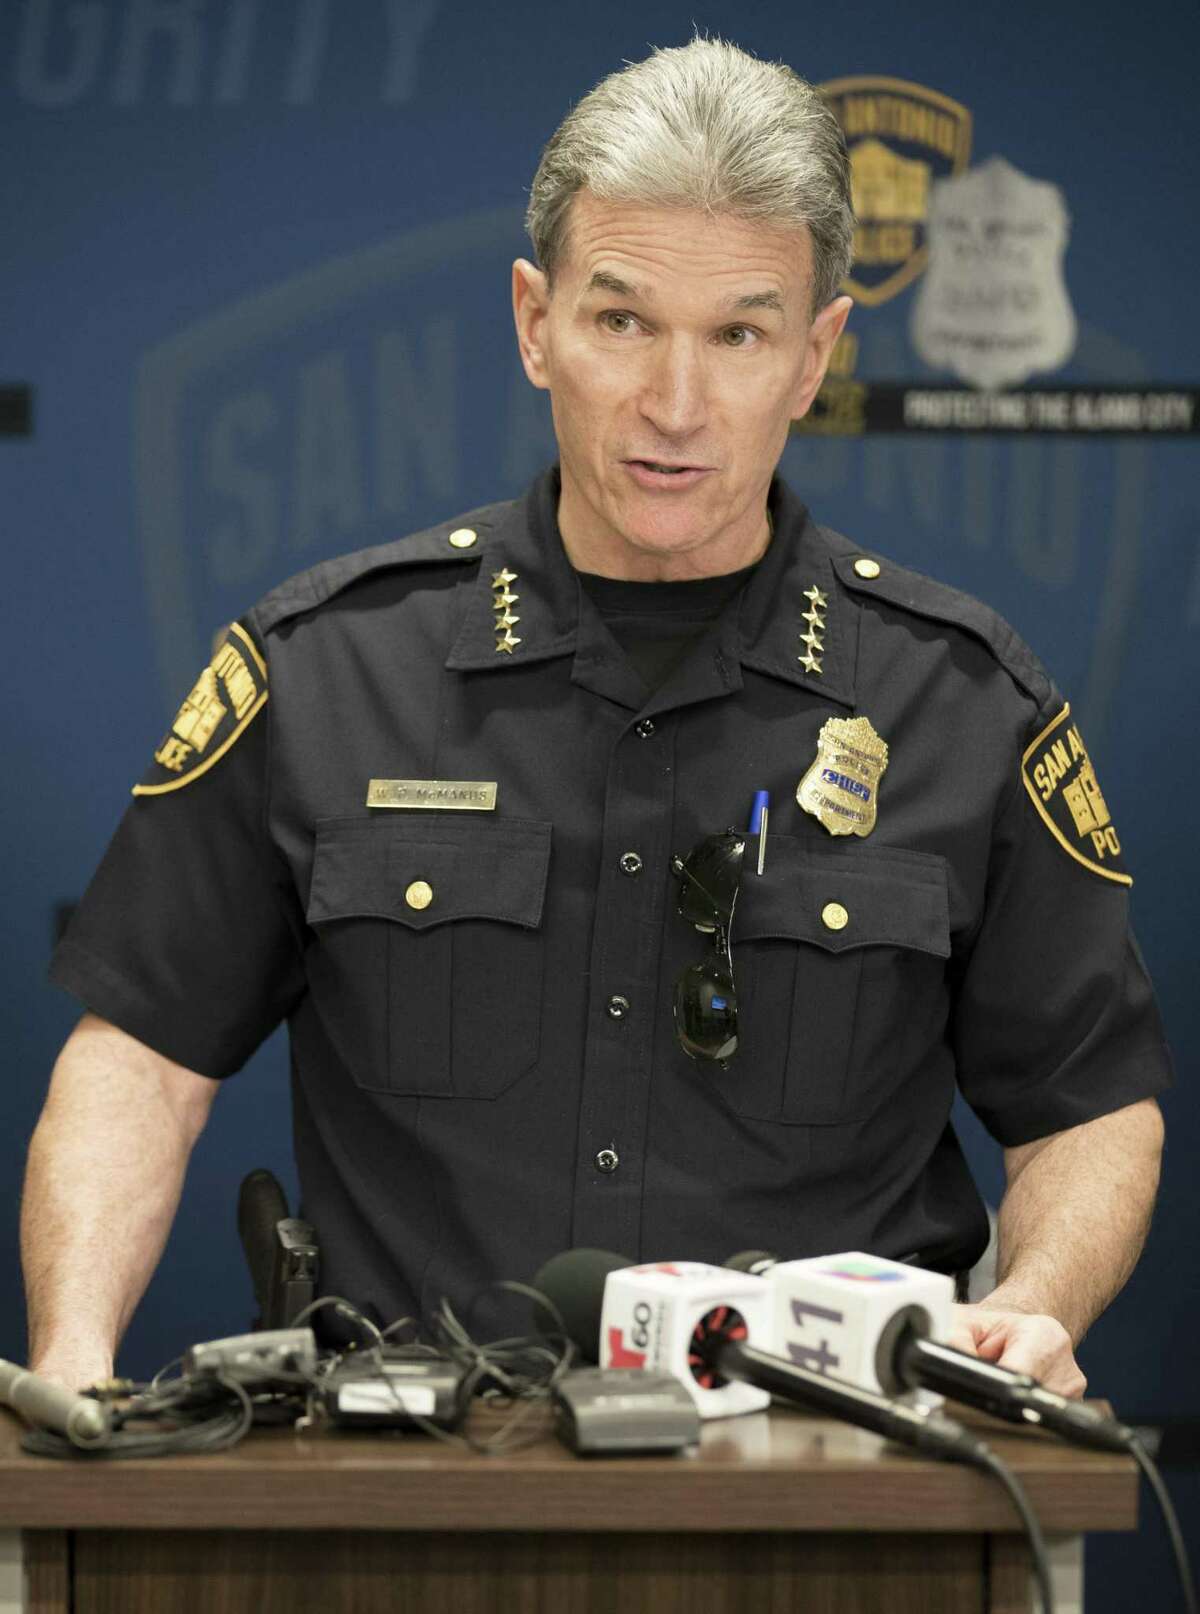 San Antonio Police Chief William McManus speaks during a press conference regarding the expanded involvement of state law enforcement in San Antonio to assist local authorities in cracking down on gang-related activity and growth in violent crime, Monday, Oct. 30, 2017, at Public Safety Headquarters in Downtown San Antonio. (Darren Abate/For the Express-News)